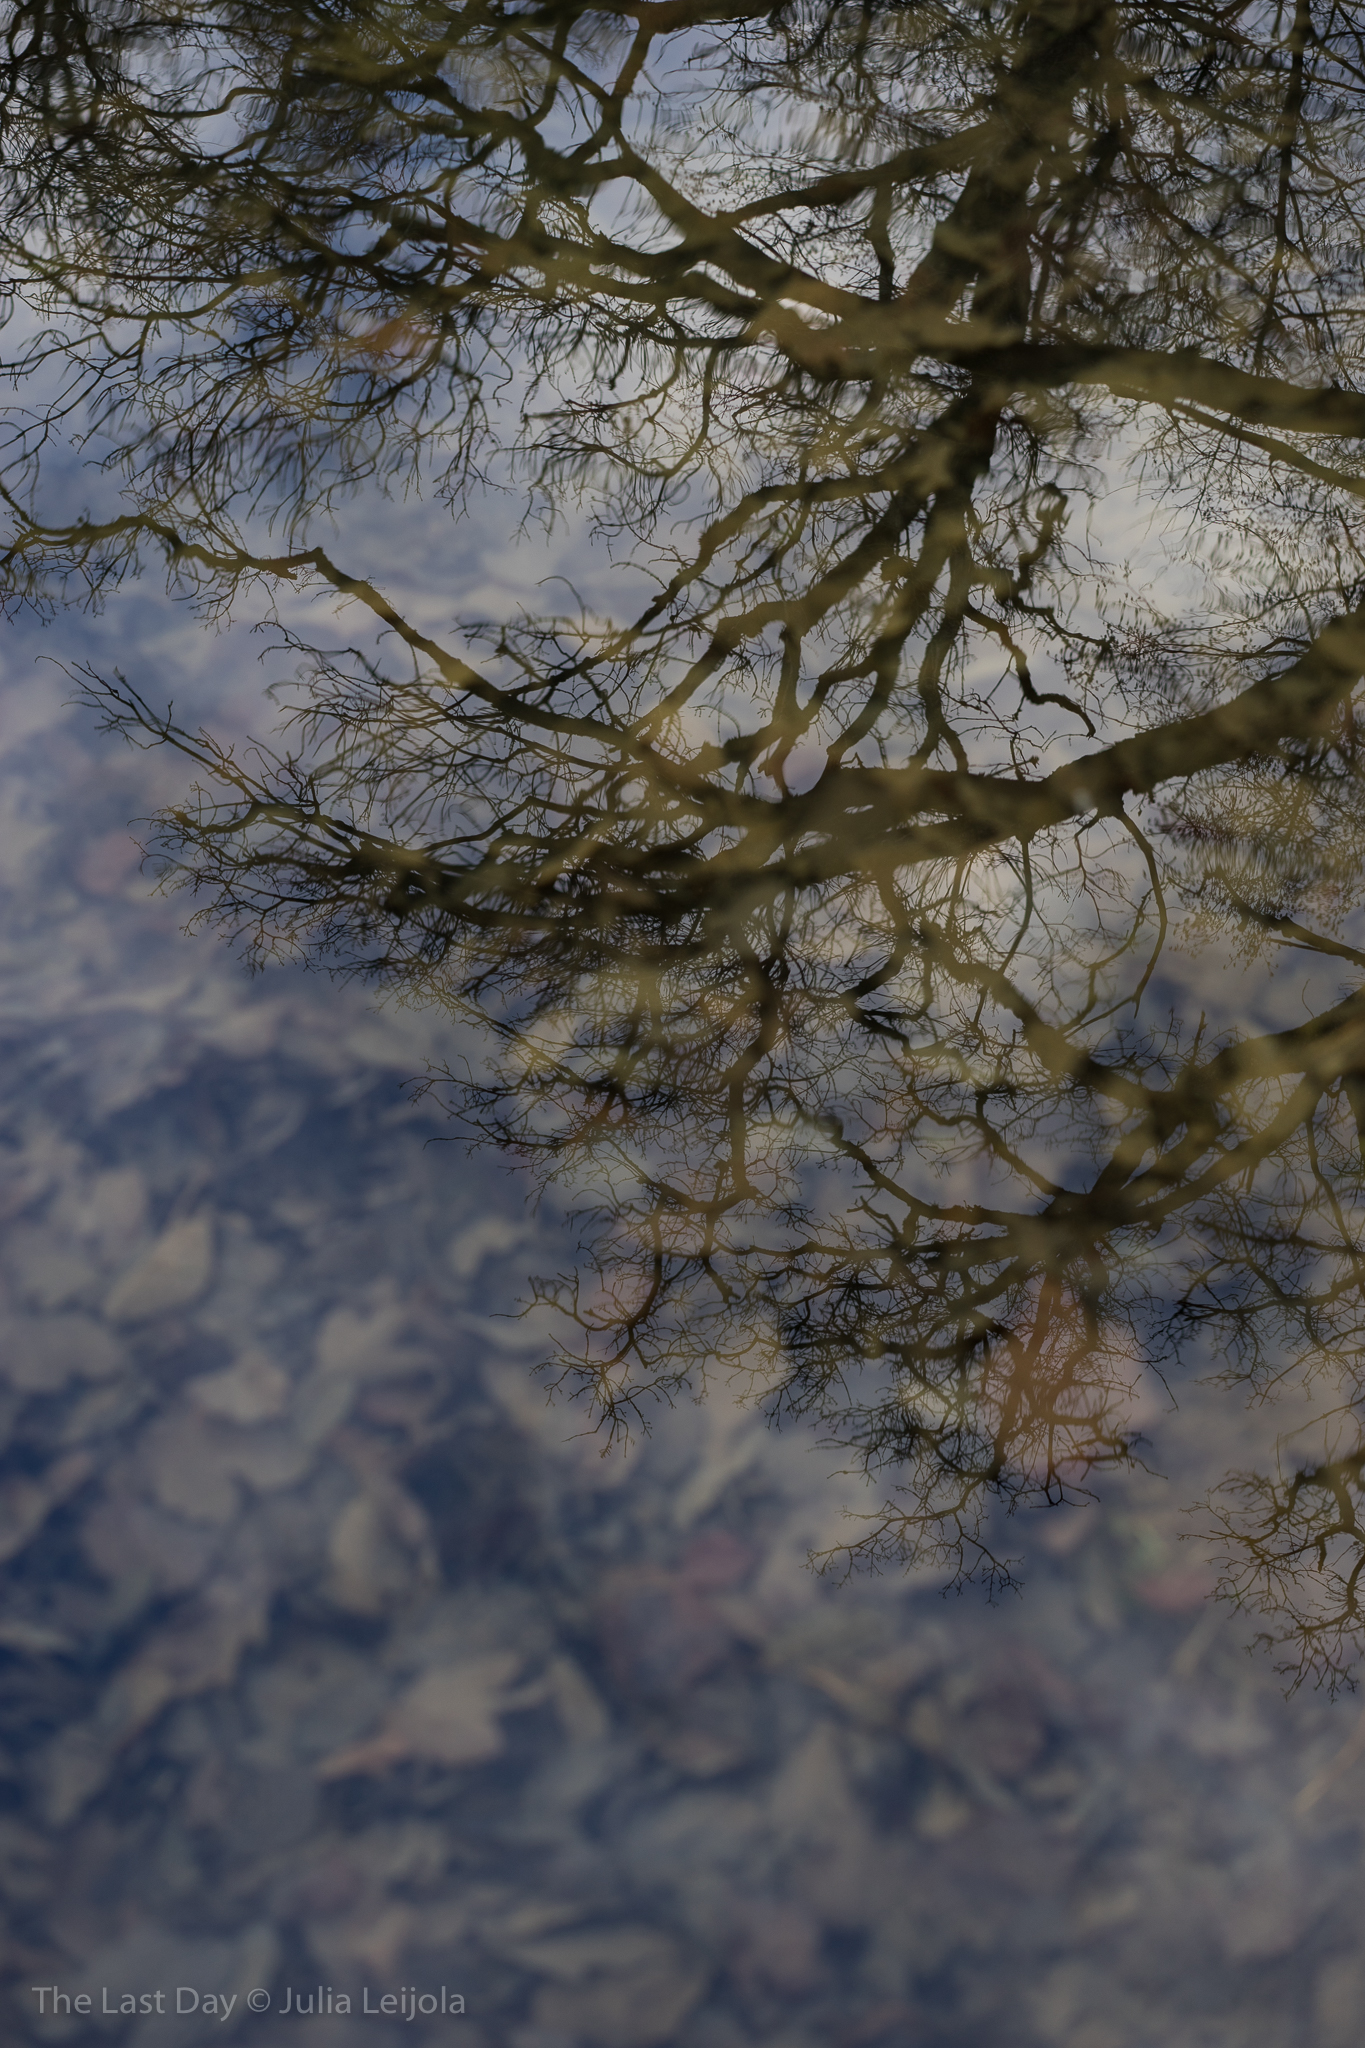 Bare trees reflected on the surface of water.